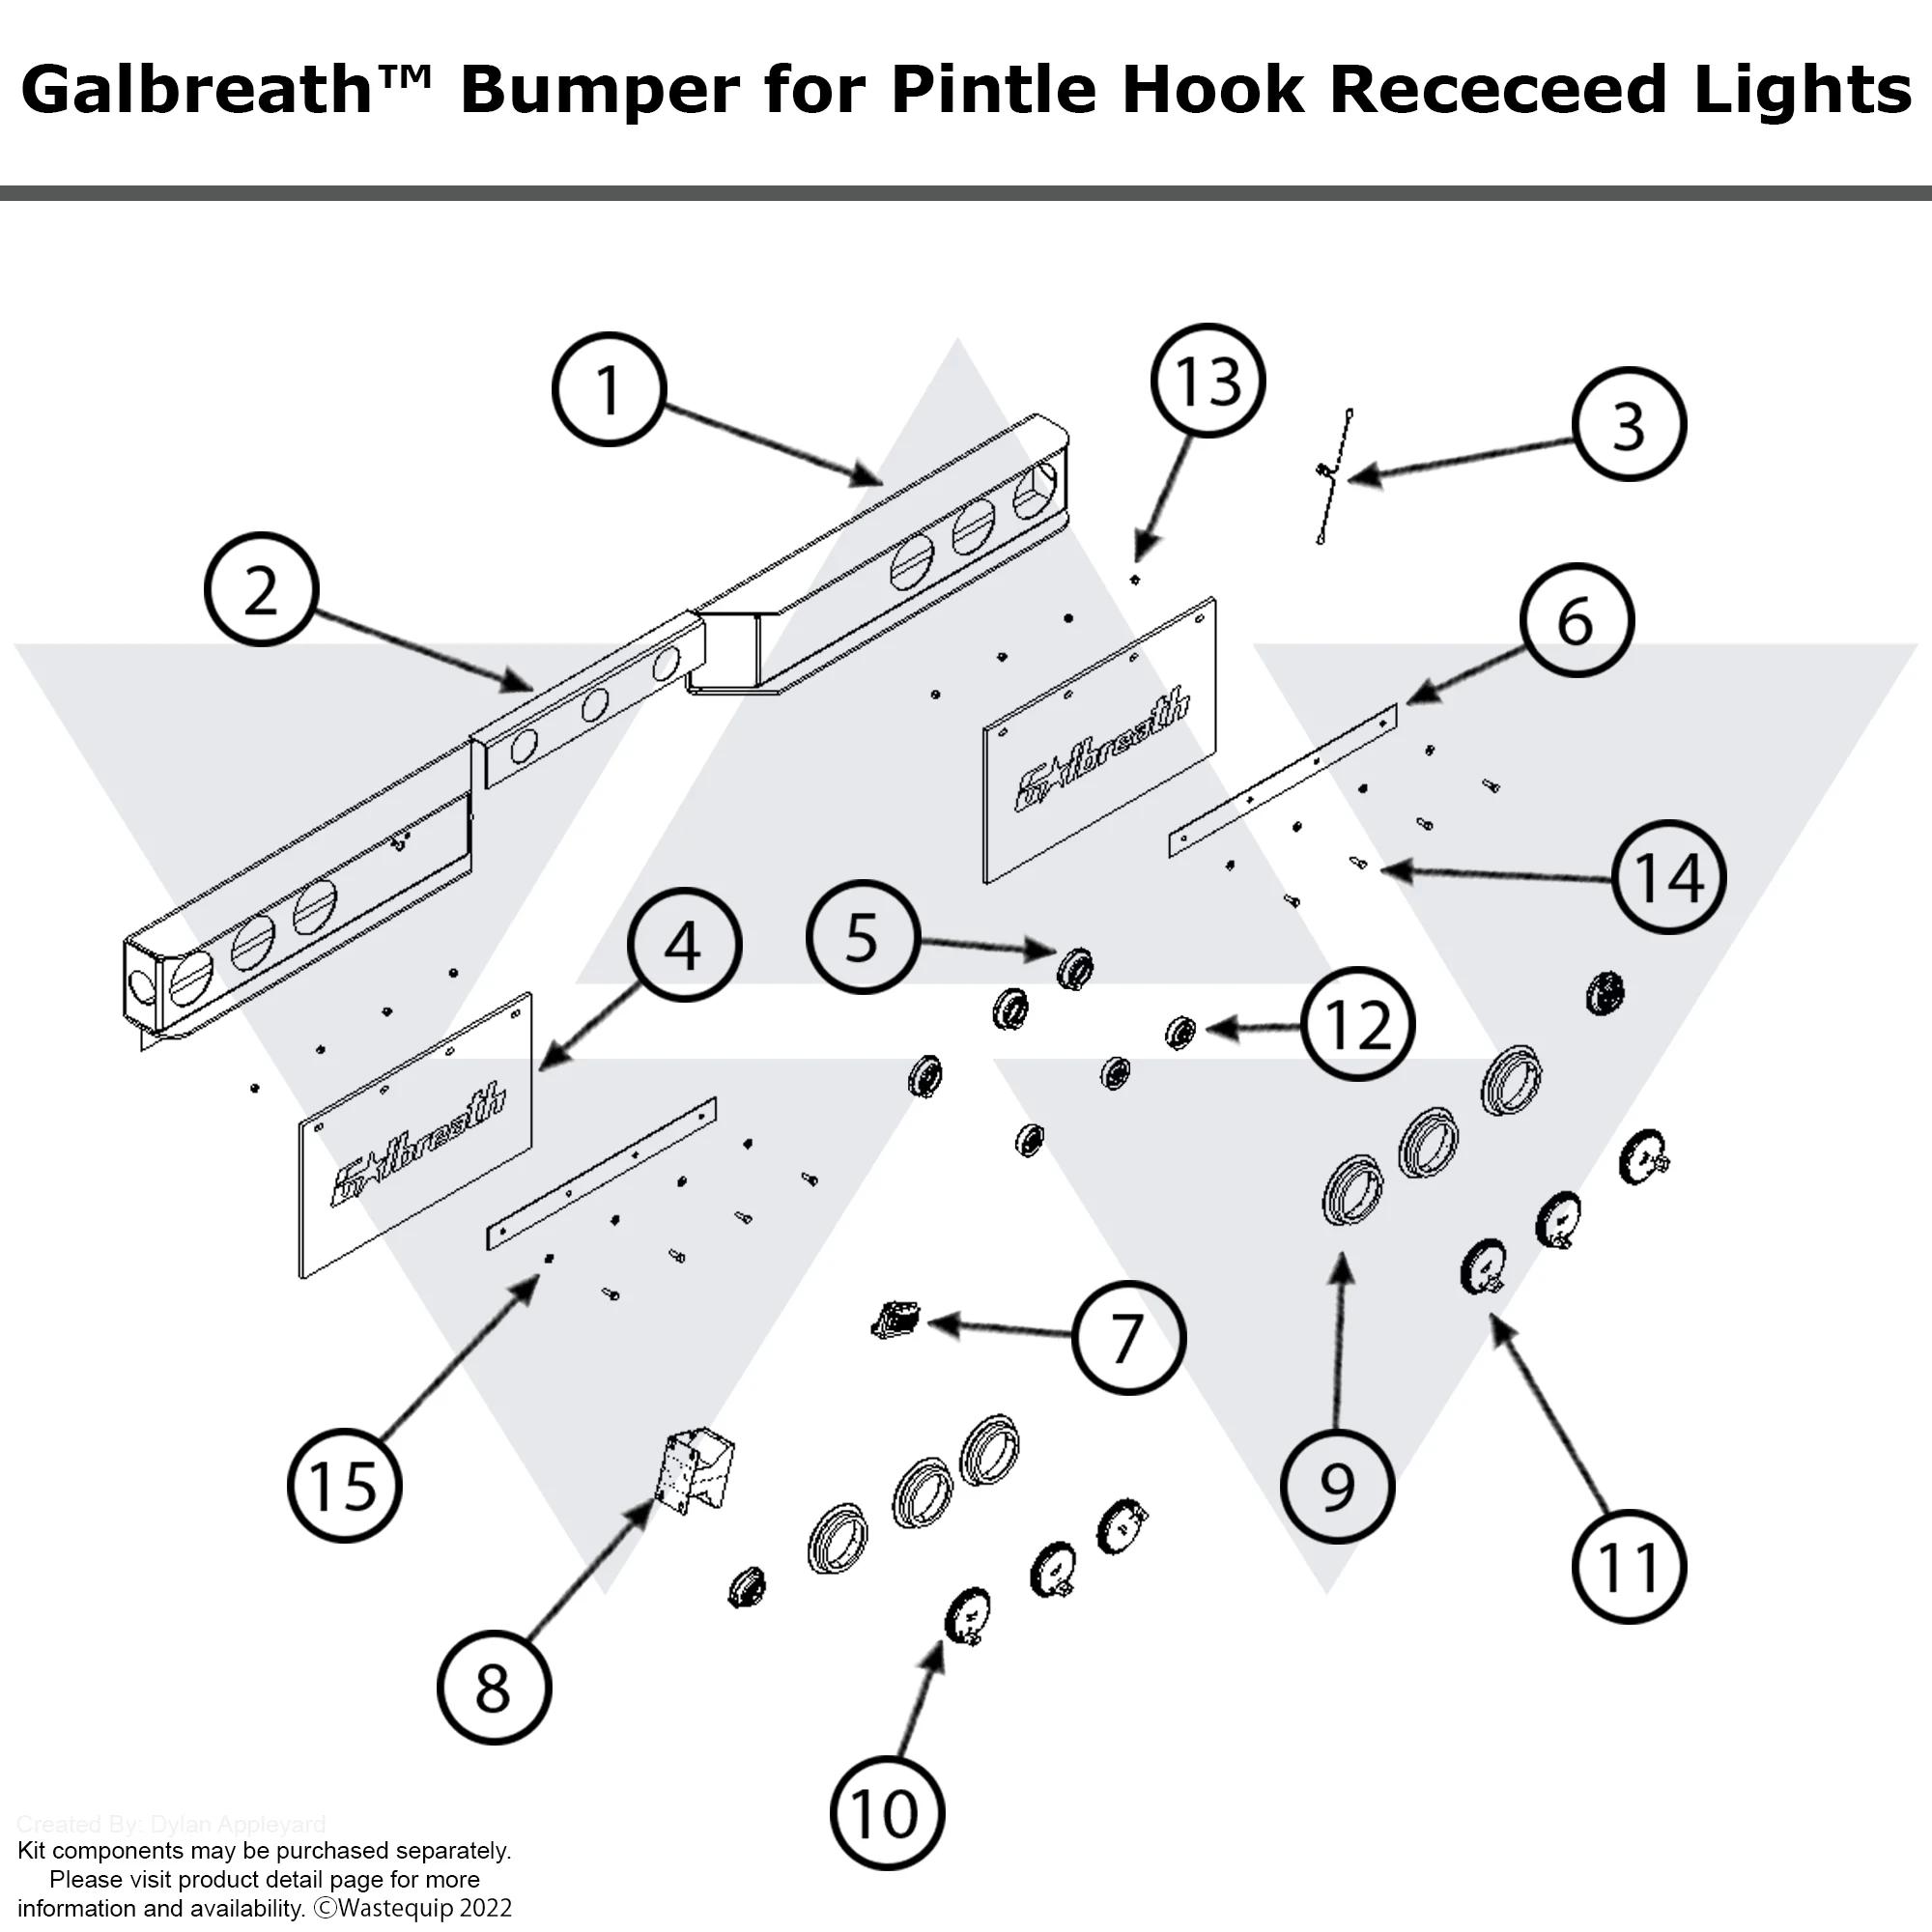 Galbreath™ Bumper for Pintle Hook With Recessed Lights